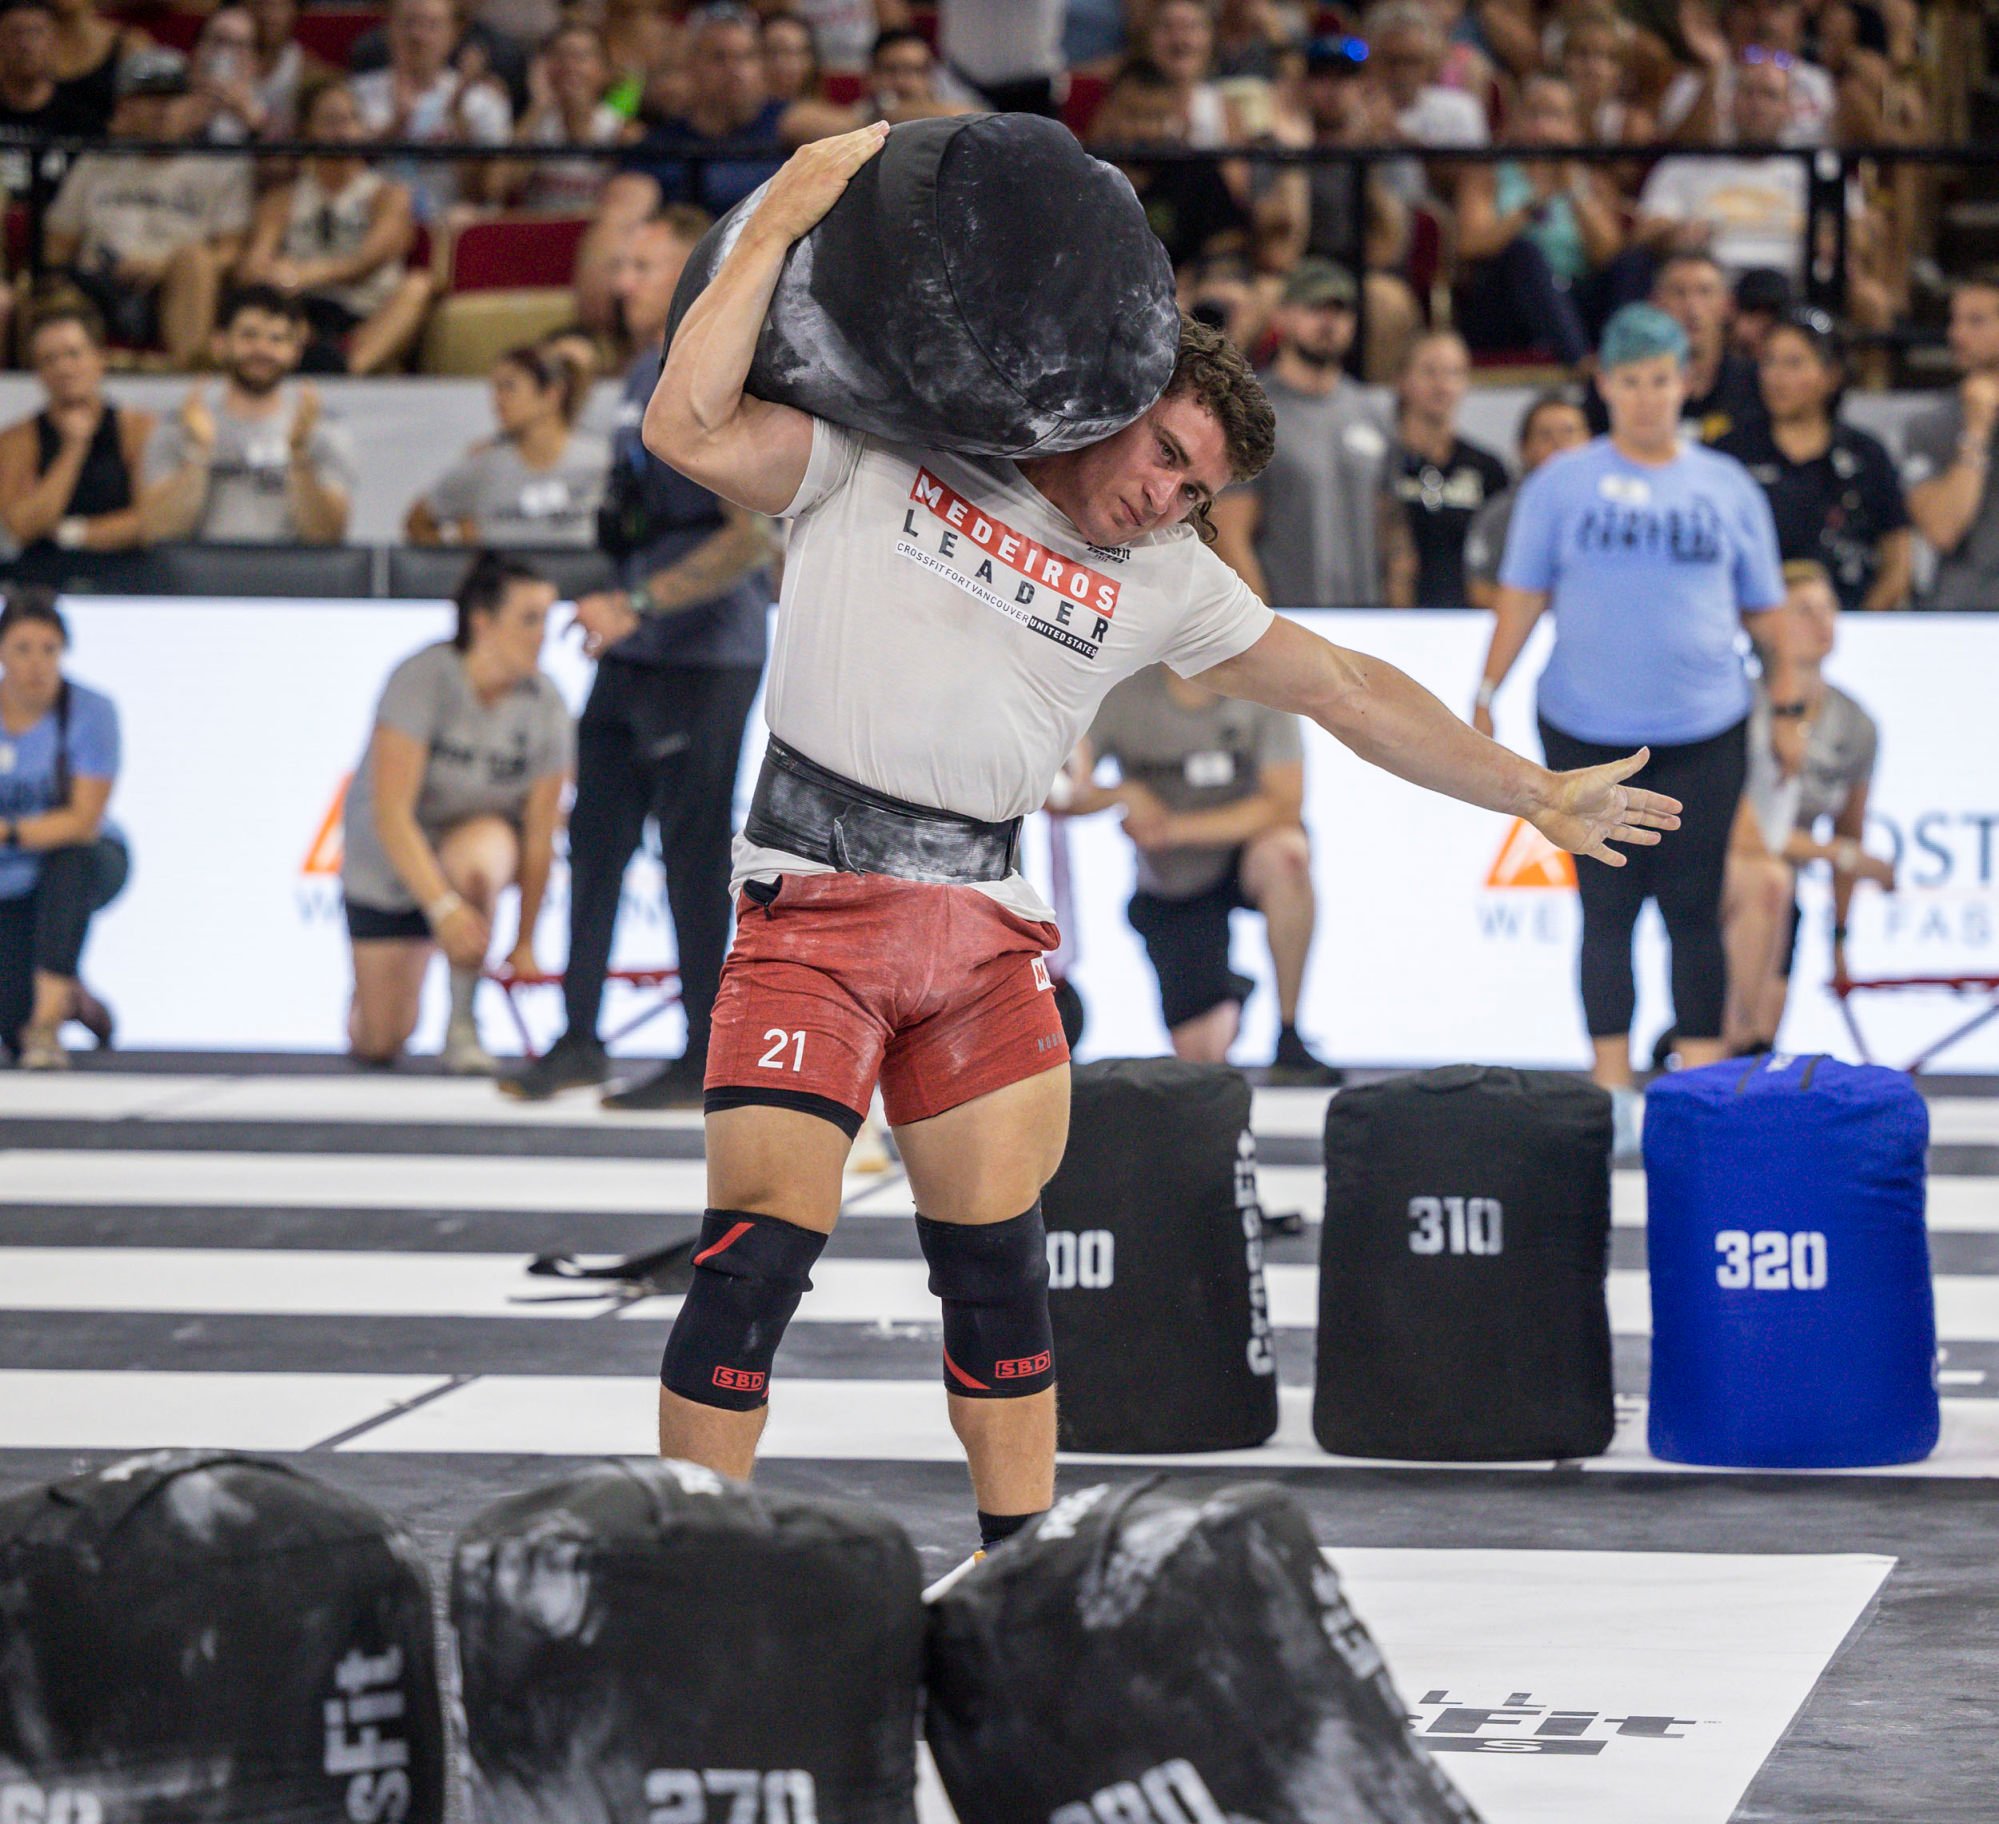 CrossFit Games changes to qualification process, standardised workouts